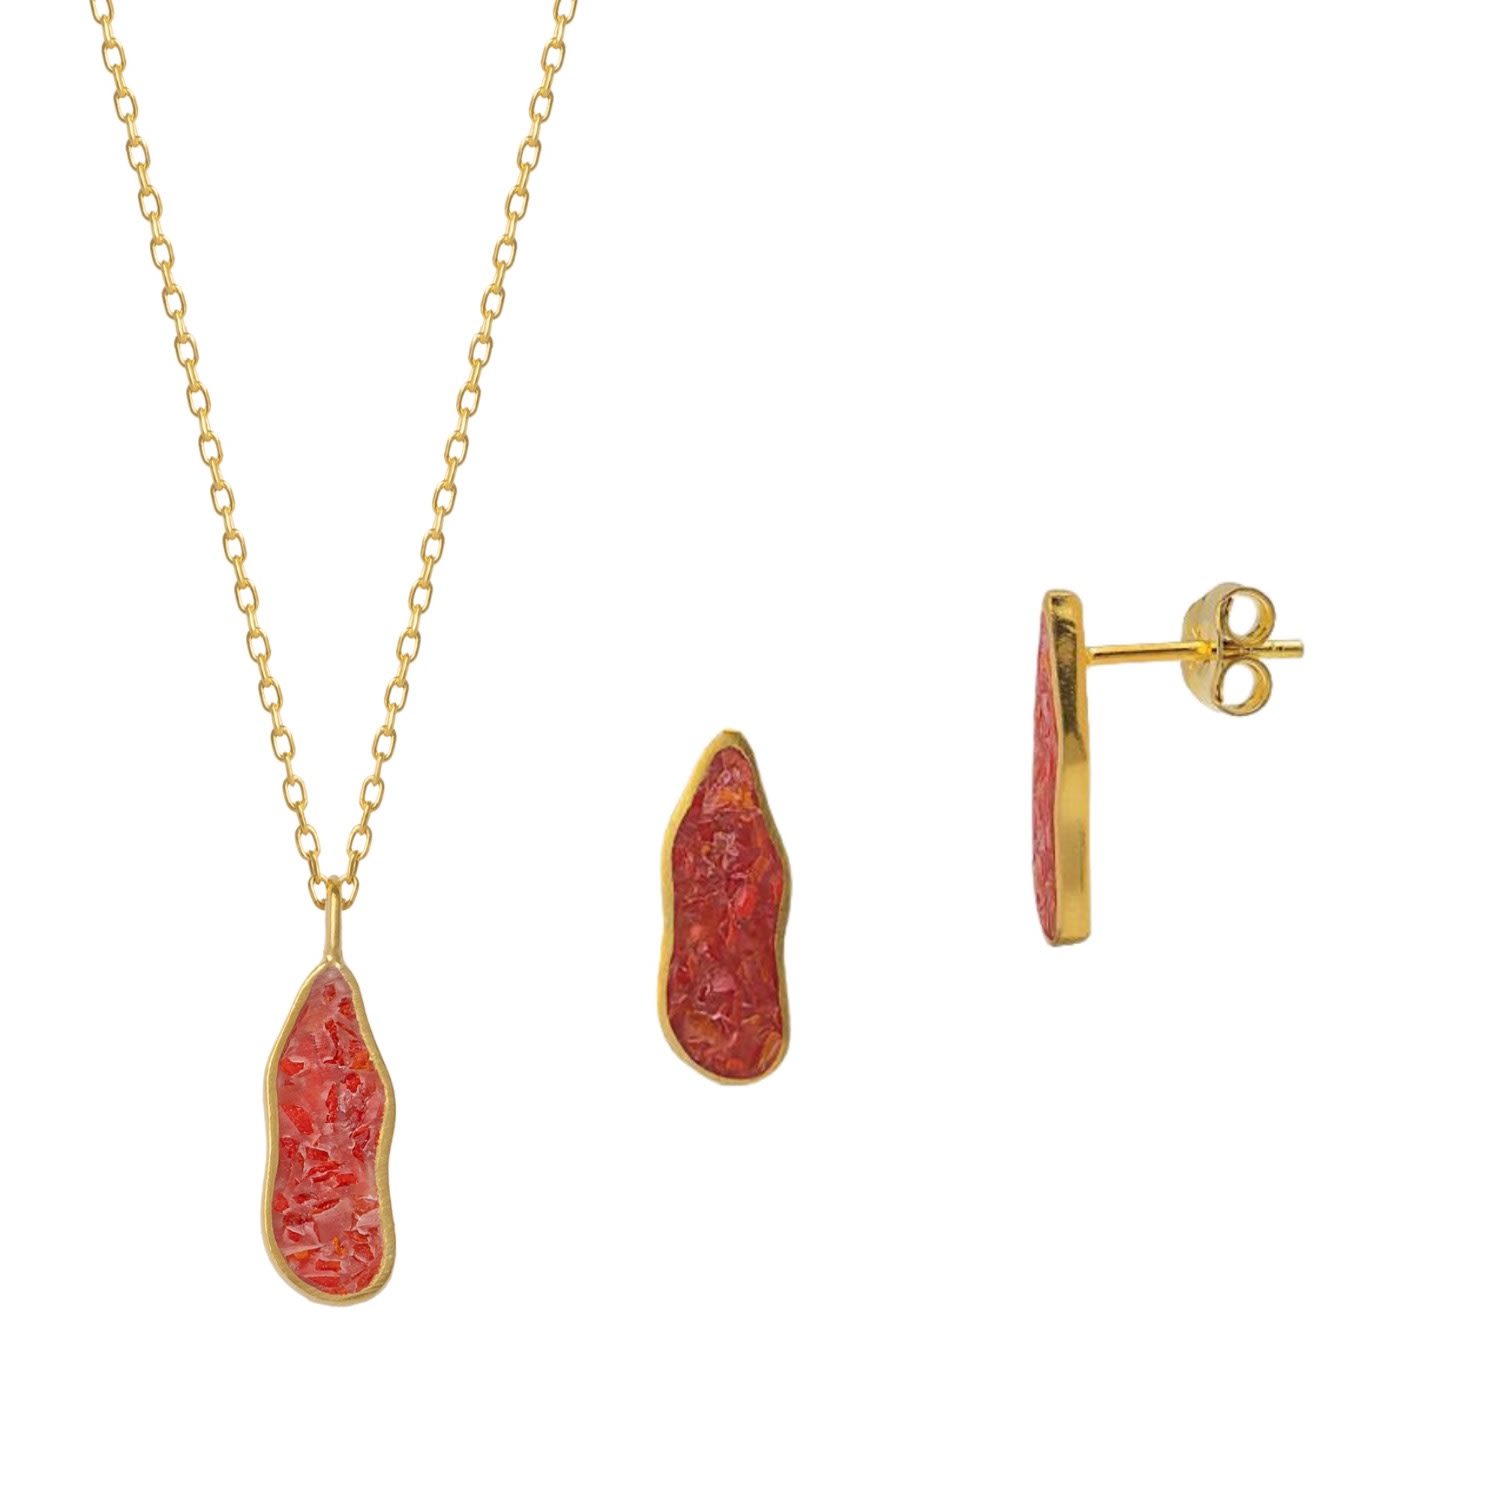 Spero London Women's Red Molten Coral & Amber Sterling Silver Gold Plated Earring & Necklace Set - Coral